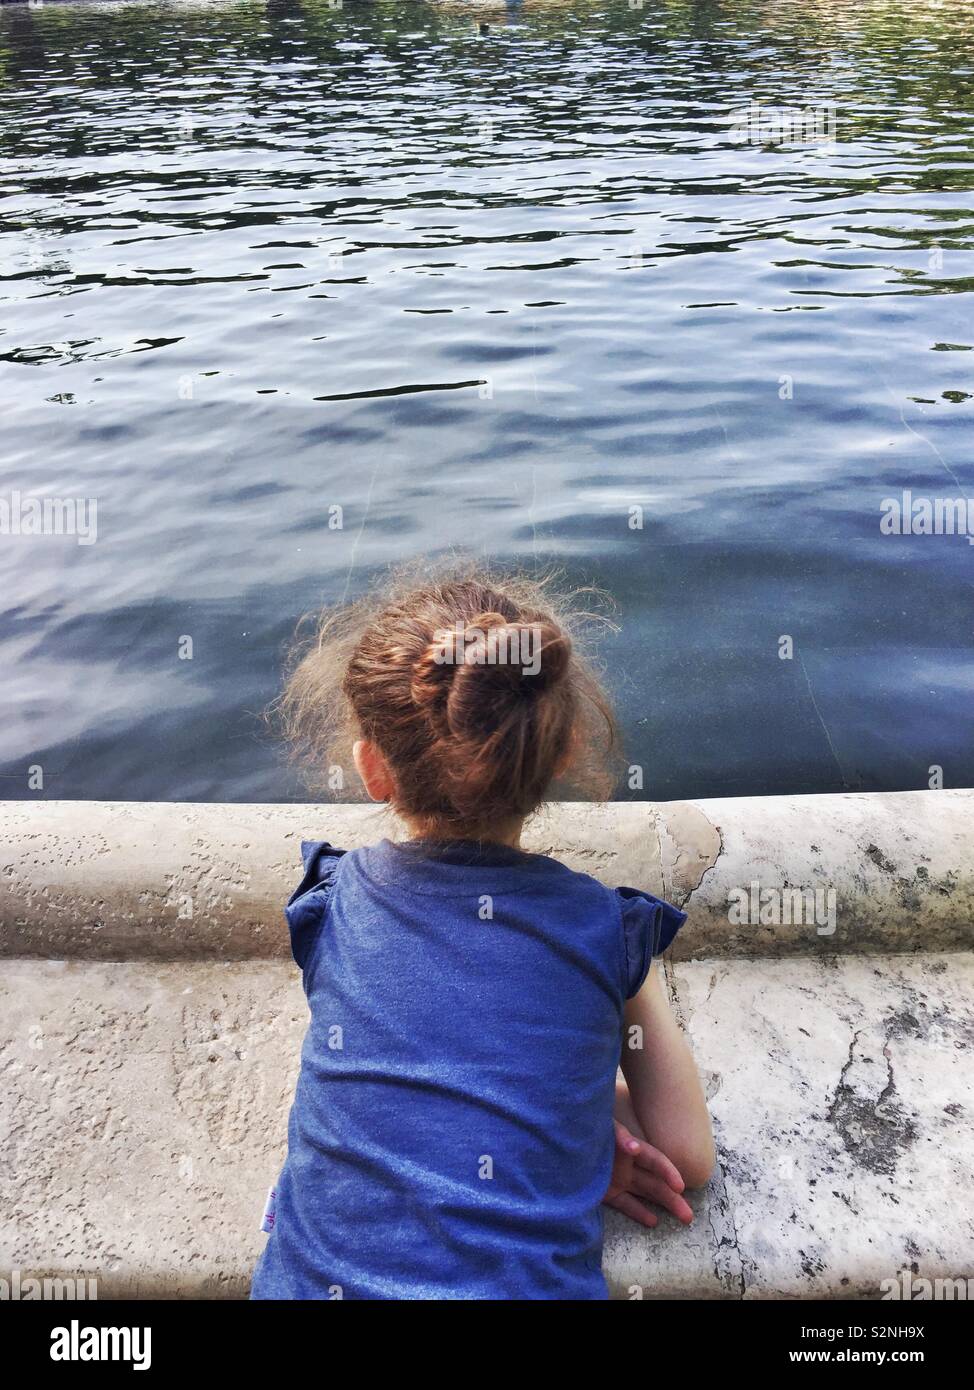 Little girl looking at water Stock Photo